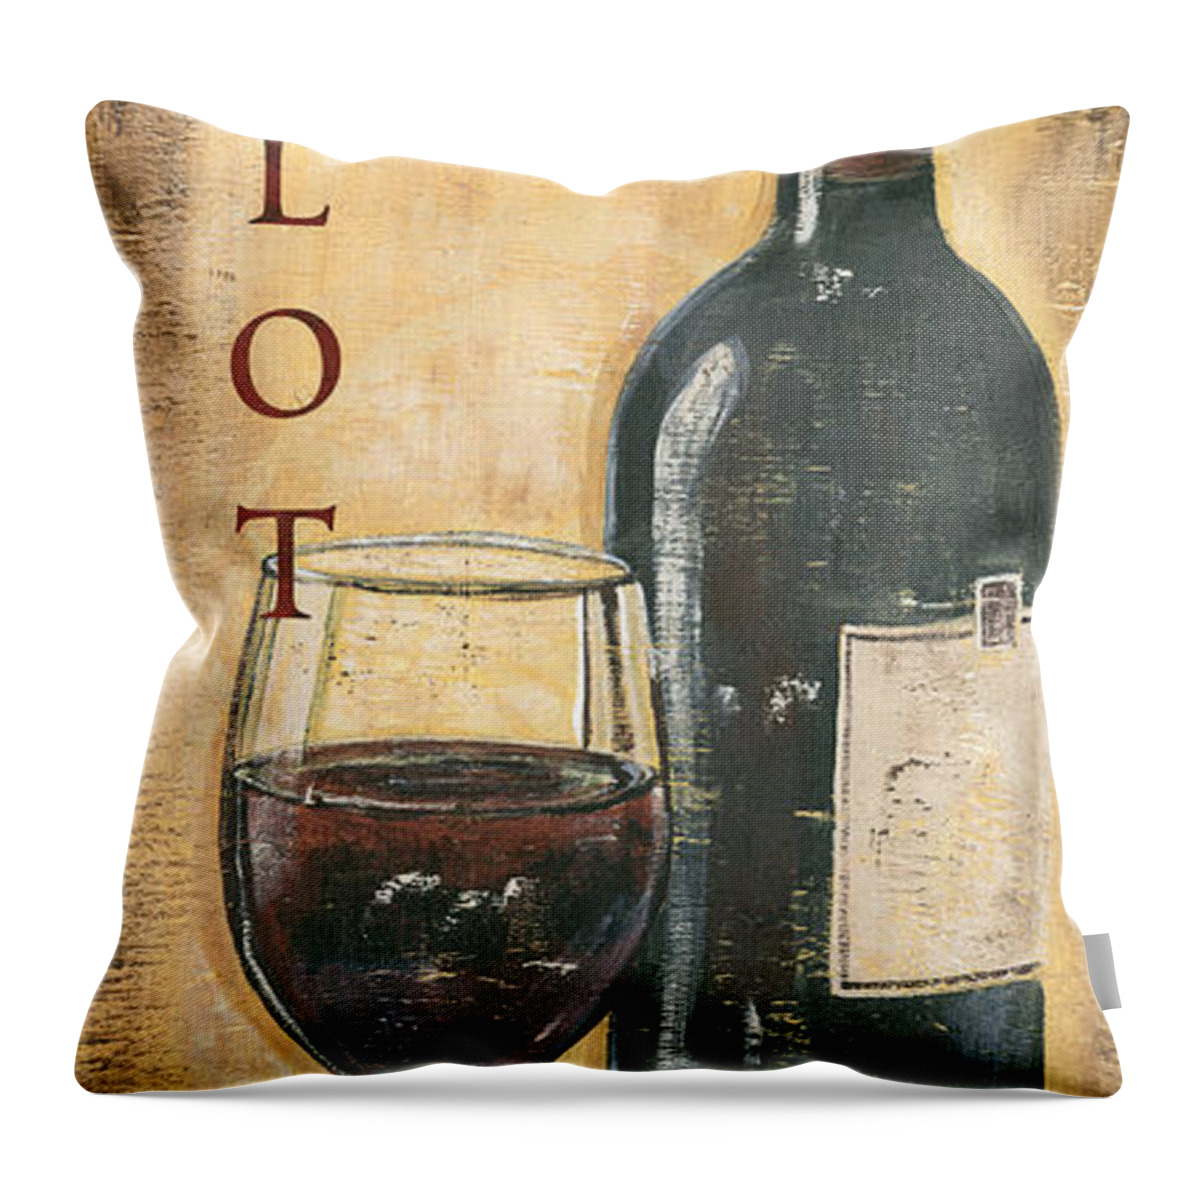 Wine Throw Pillow featuring the painting Merlot Wine and Grapes by Debbie DeWitt